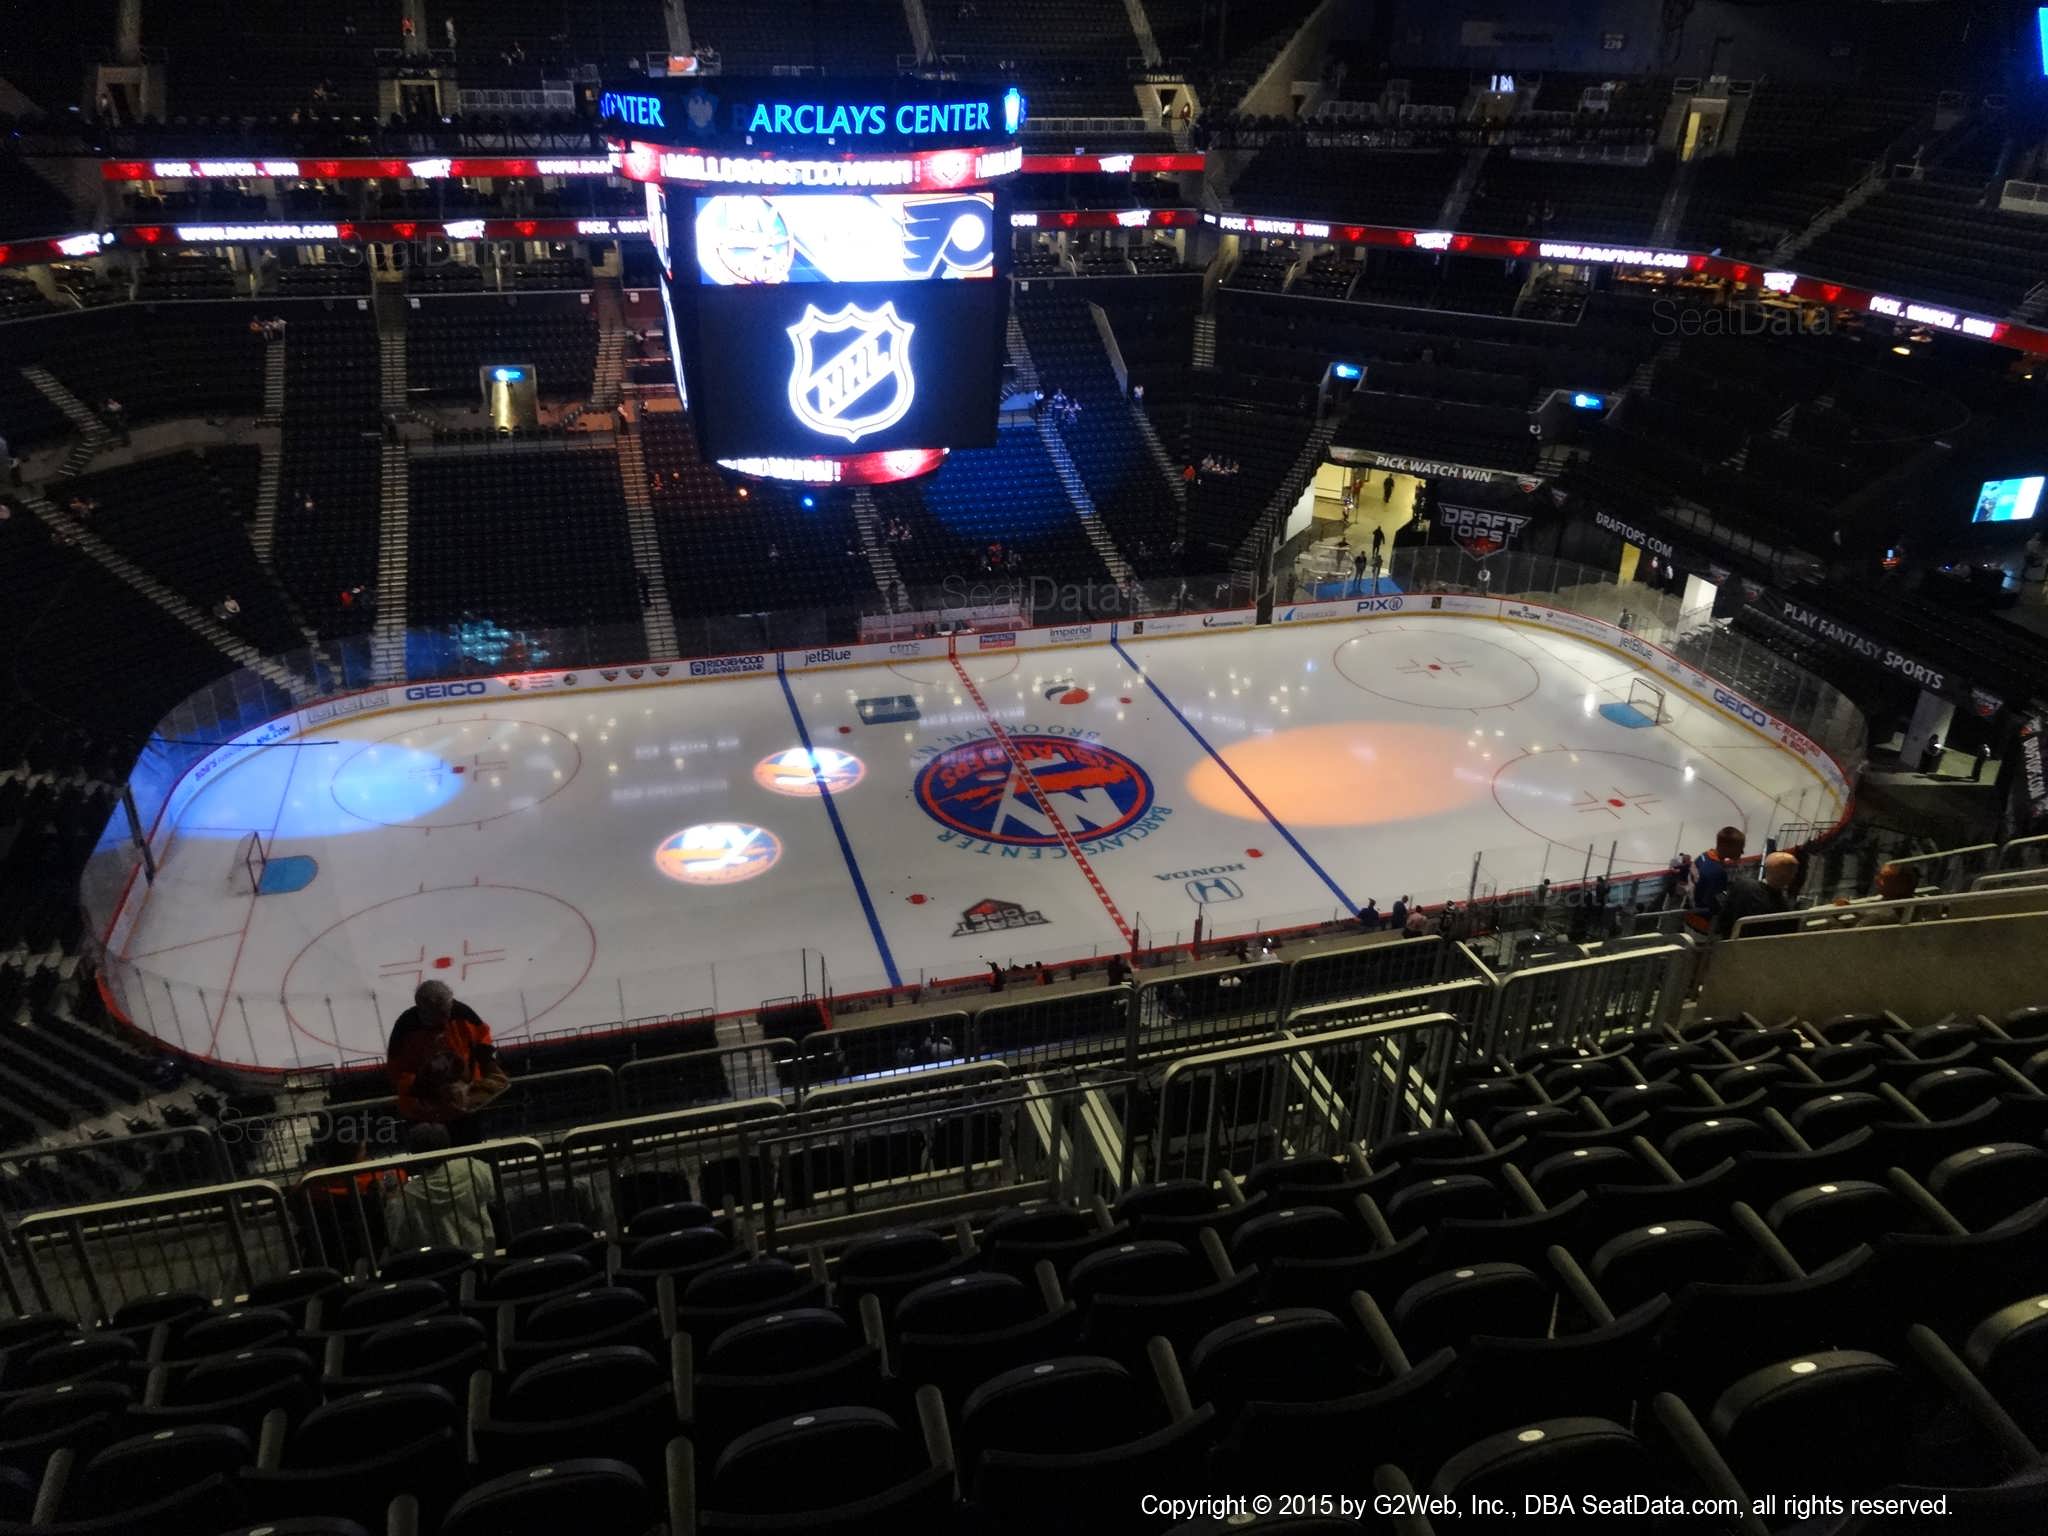 Seat View from Section 209 at the Barclays Center, home of the New York Islanders